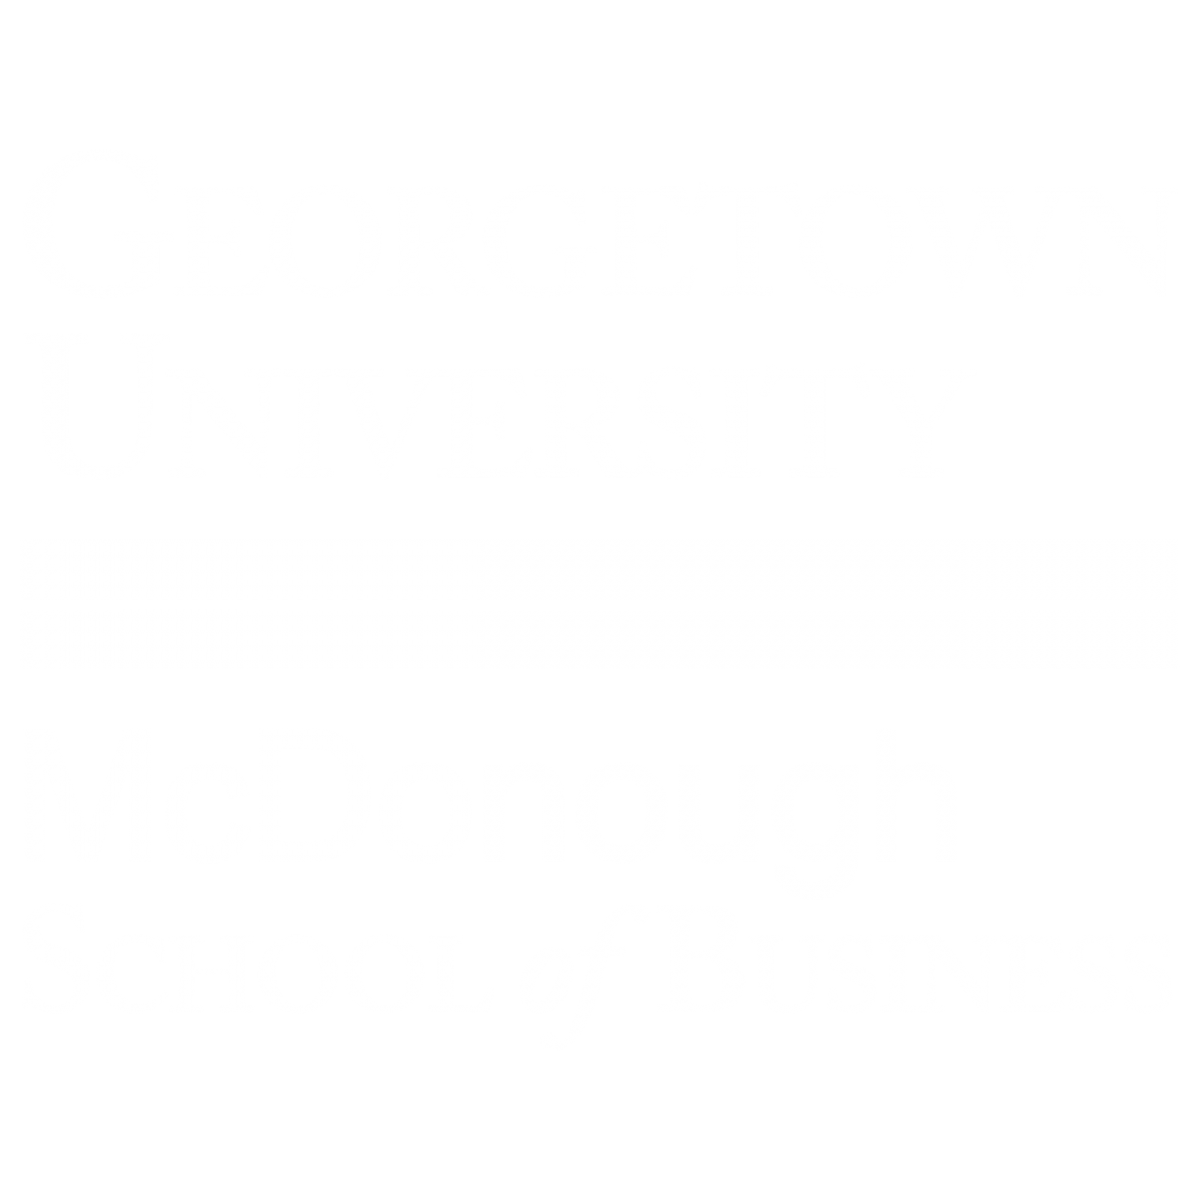 Official Business Logo - McDonough School of Business Logos, Style Guides, and Templates ...